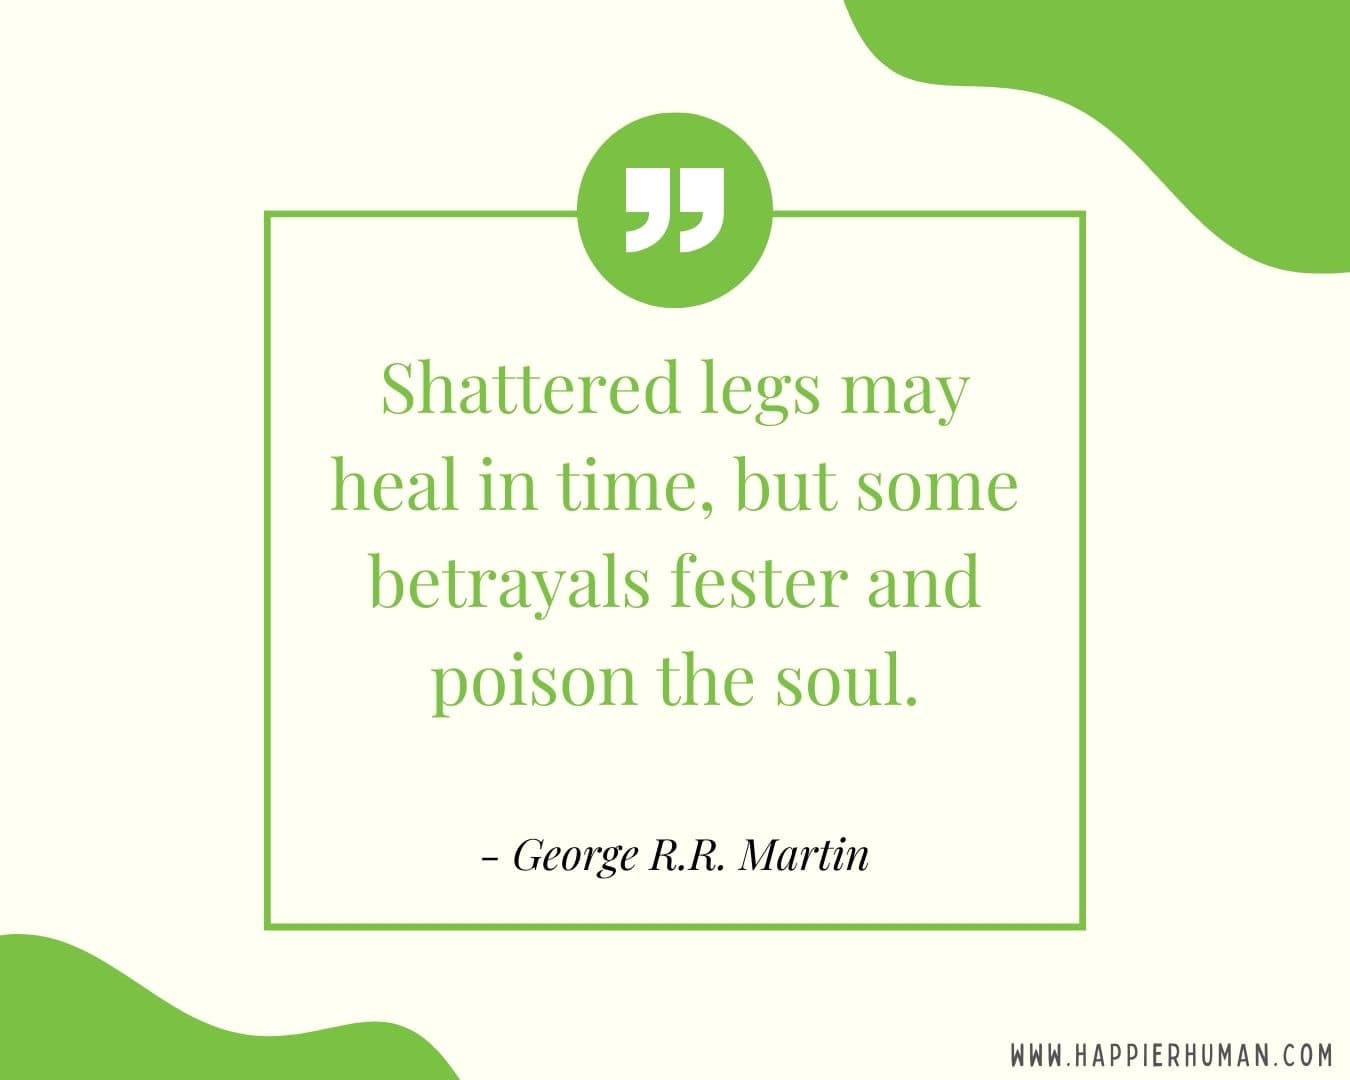 Broken Trust Quotes - “Shattered legs may heal in time, but some betrayals fester and poison the soul.” - George R.R. Martin